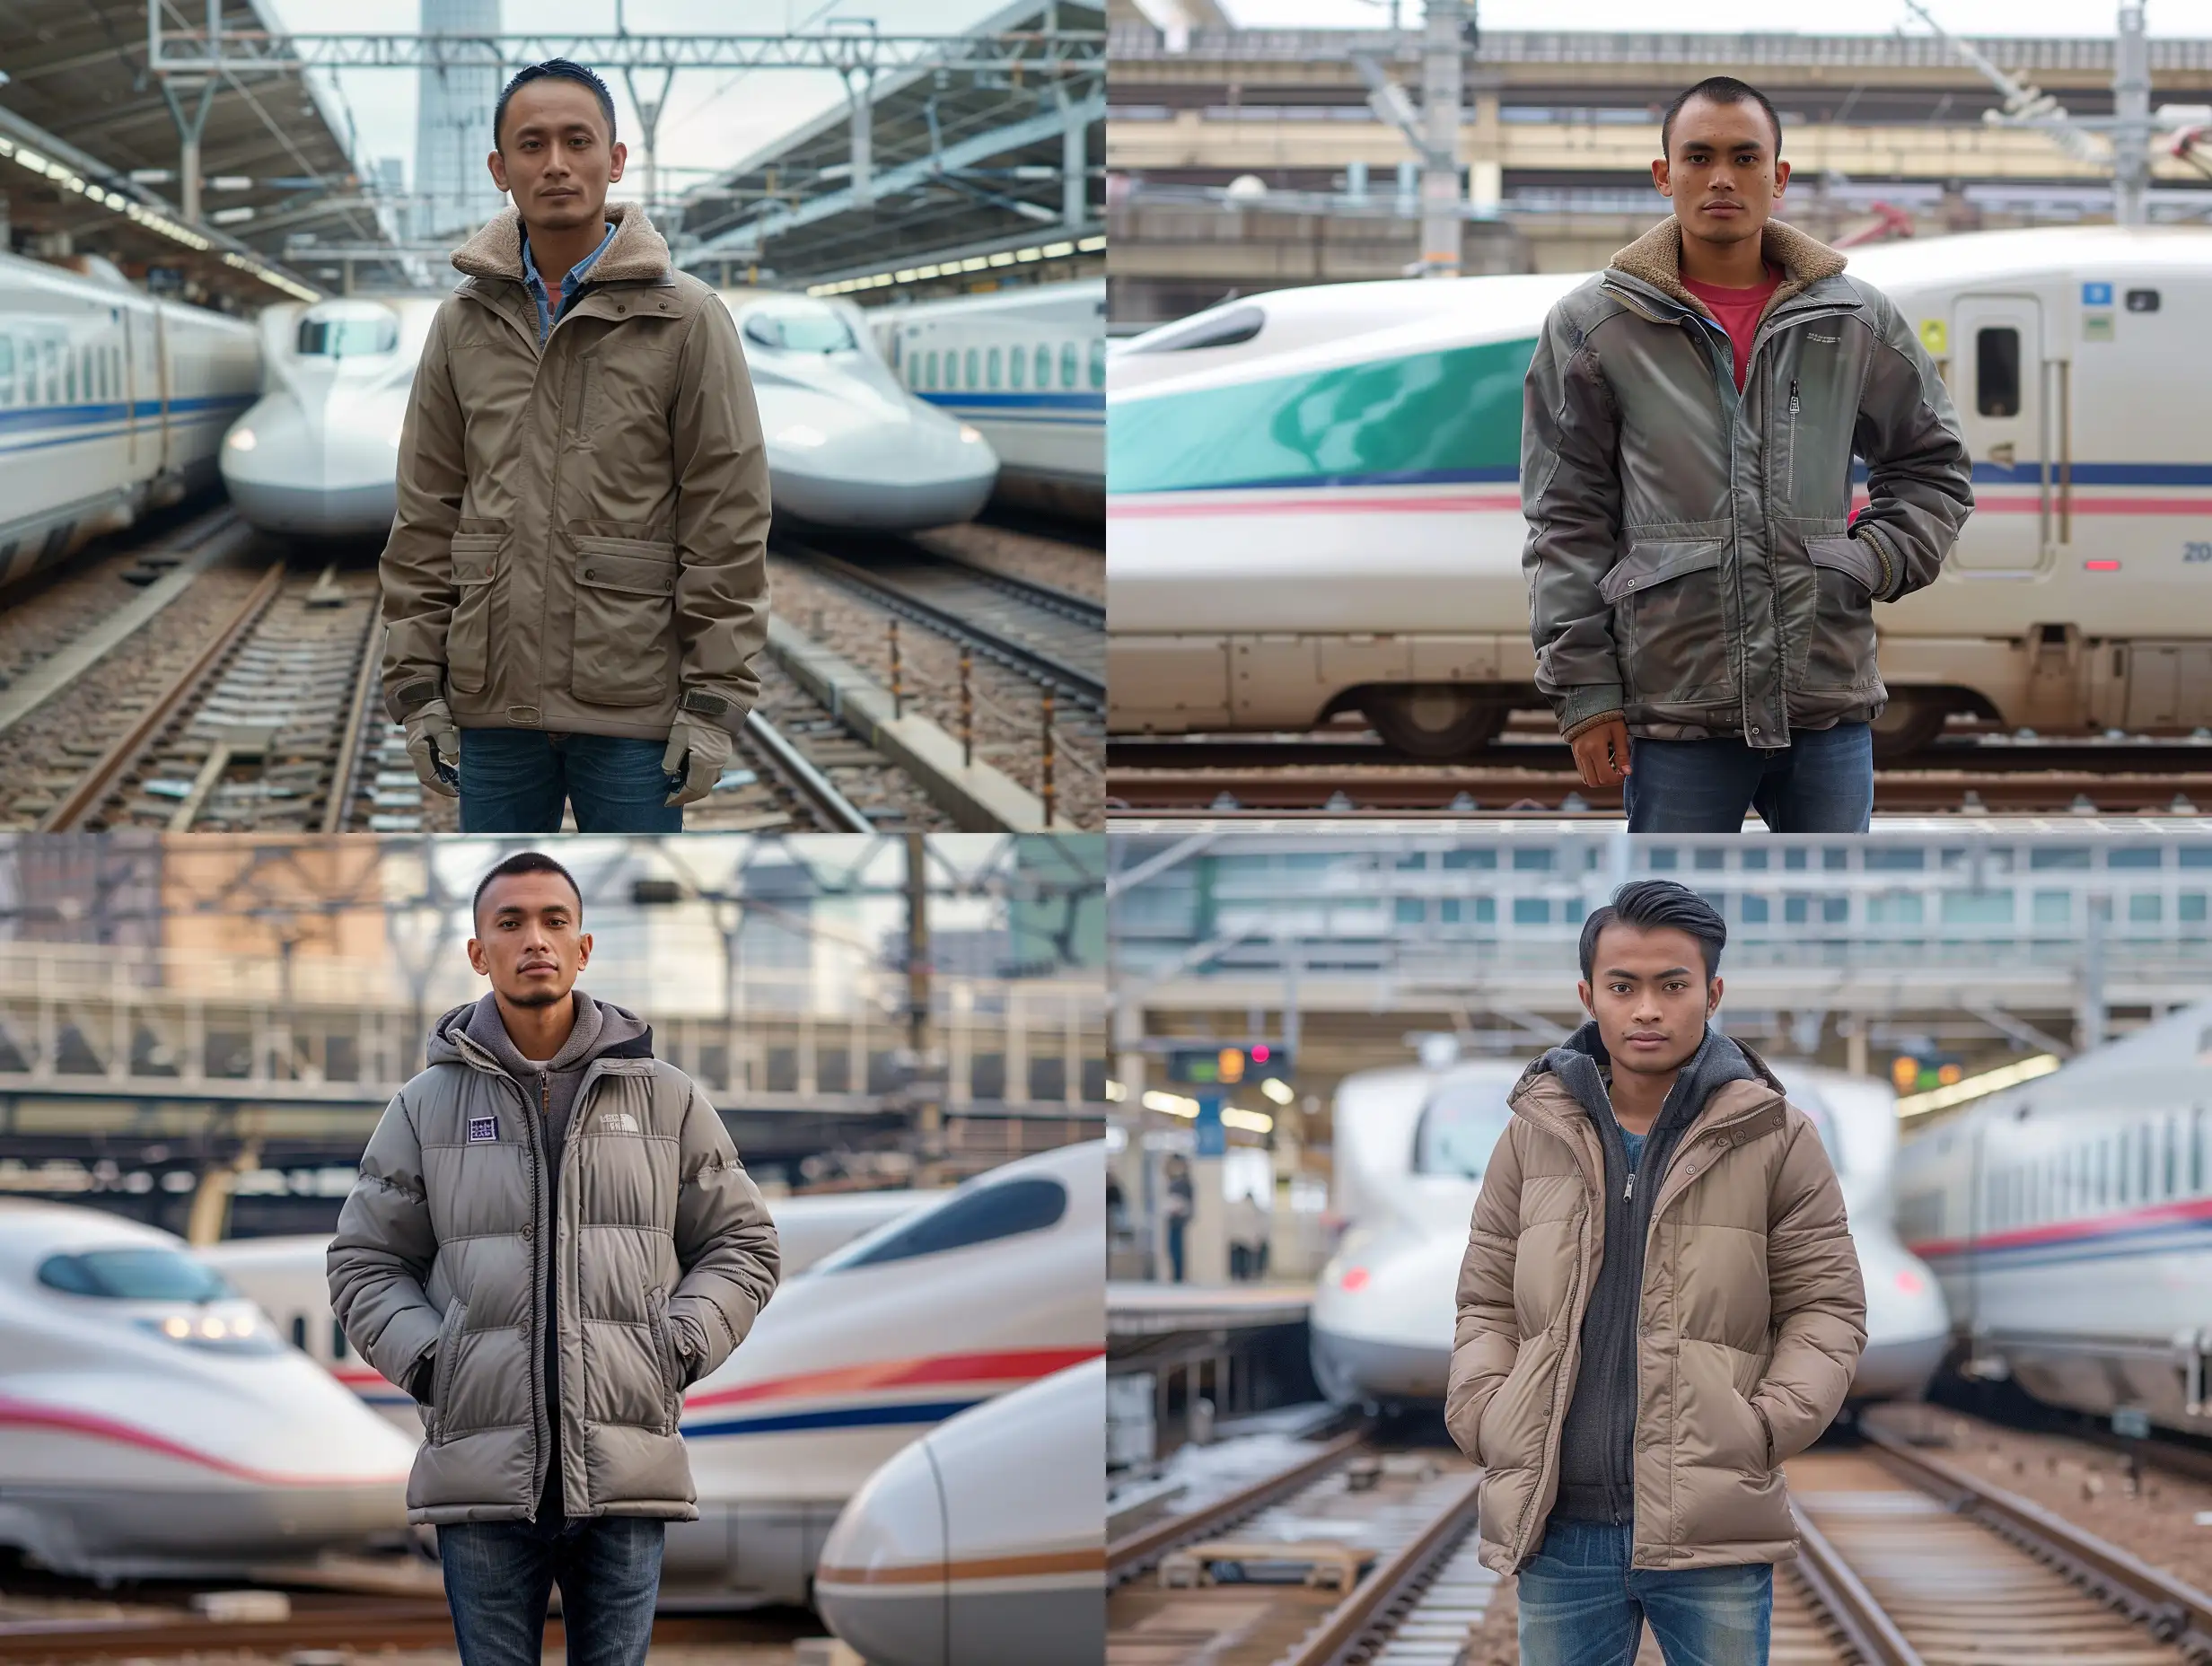 an Indonesian Javanese man (25 years old, oval and clean face, Indonesian hair, thin body, brown skin, wearing a thick winter jacket, jeans) standing posing like a model in front of Shinkansen (bullet trains): Japan is known for its high-speed trains, such as the Shinkansen, which can travel at speeds of up to 200 miles per hour.